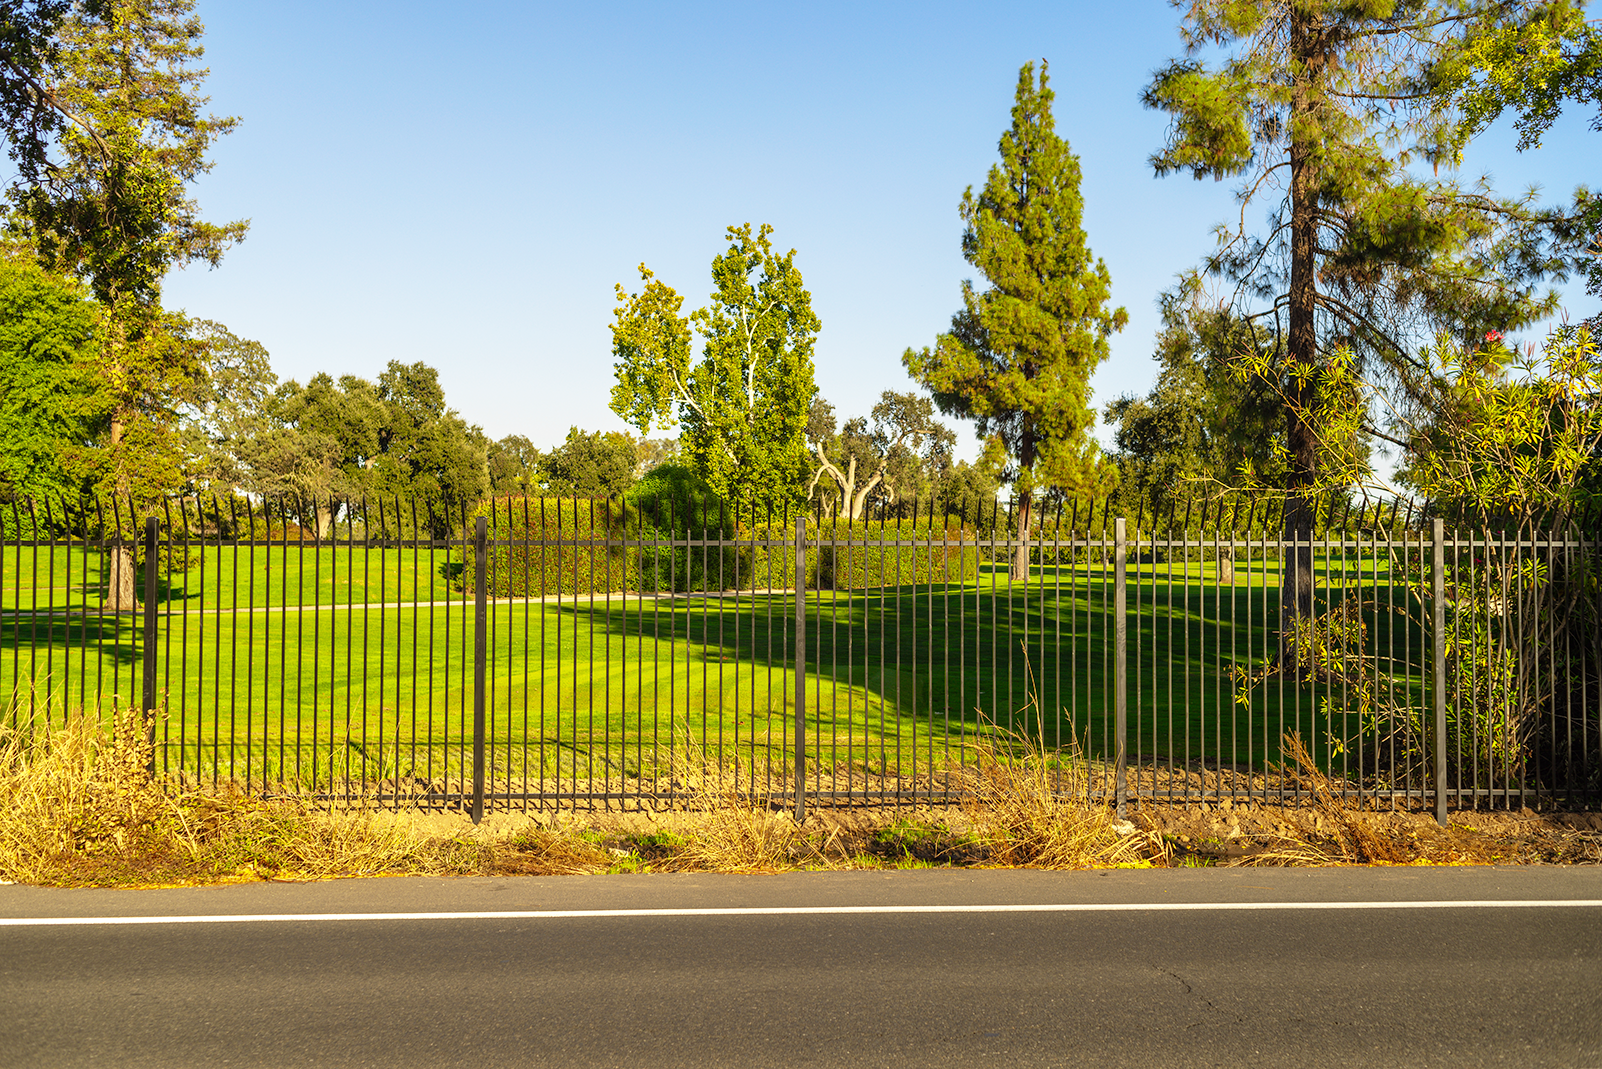 An ornamental and durable metal fence protects a beautiful property